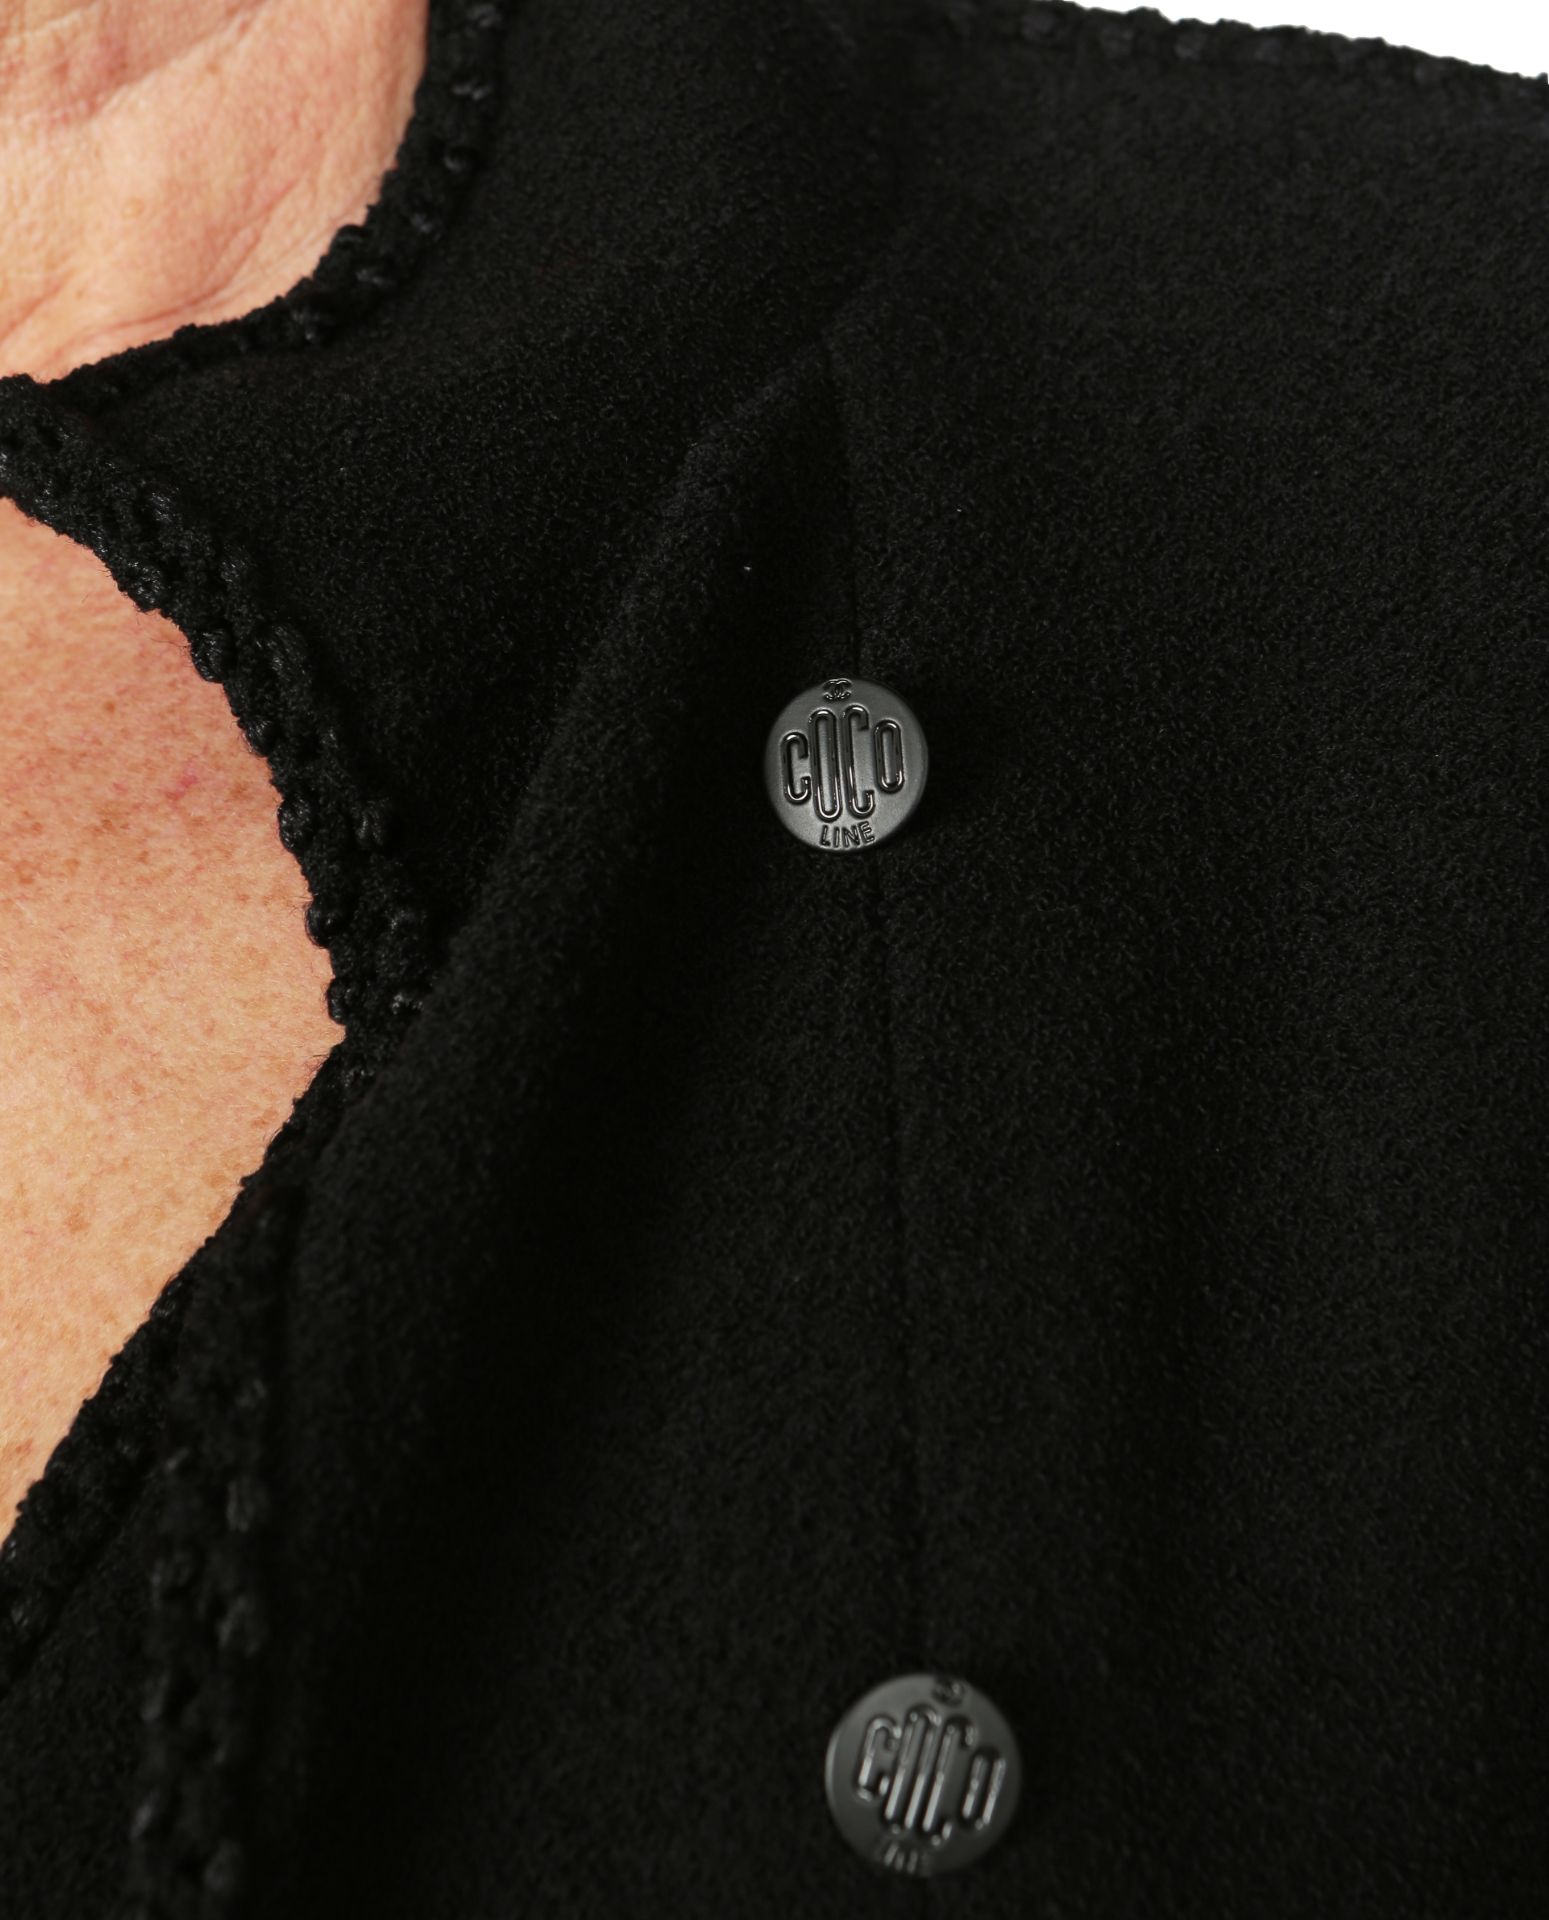 CHANEL, A BLACK WOOL JACKET - Image 4 of 5